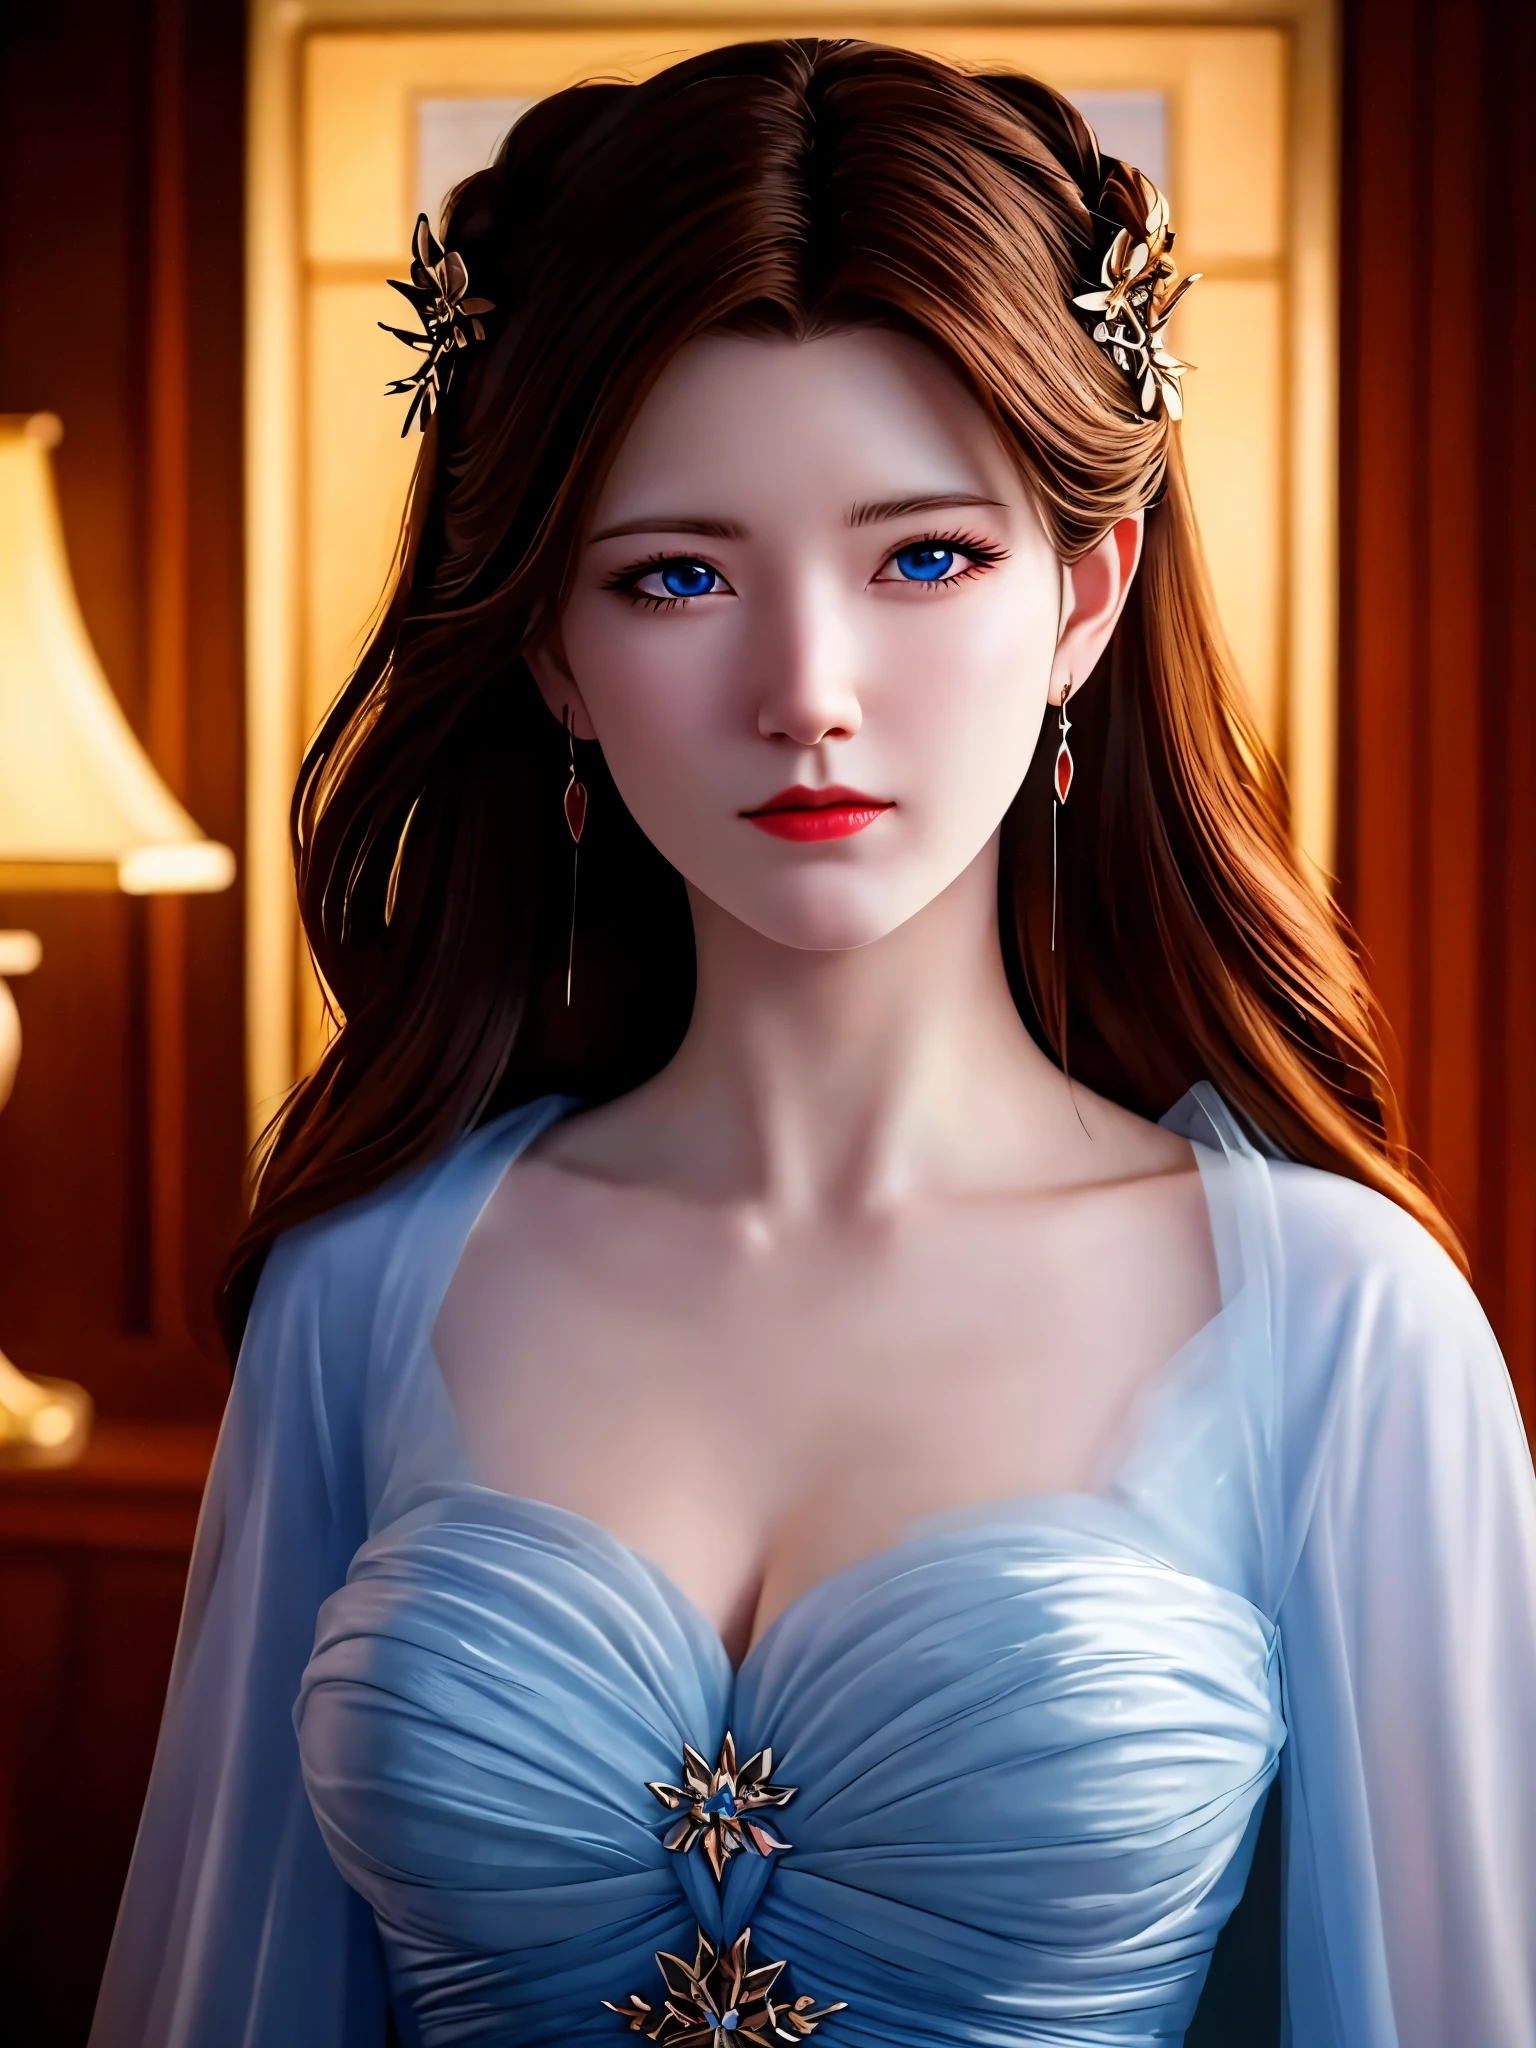 Unreal Engine 5 Realistic Rendering, detailed lips, long wavy hair, serpents for hair, fierce expression, pale complexion, mesmerizing gaze, mythical creature, dark and mysterious background, artistic oil painting style, vibrant colors, soft lighting, Unreal Engine 5 Realistic Rendering, (hyperrealistic), (illustration), (high resolution), (8K), (extremely detailed), (best illustration), (beautiful detailed eyes), (best quality), (ultra-detailed), (masterpiece), (wallpaper), (photorealistic), (natural light), (rim lighting), (detailed face), (high detailed realistic skin texture), (anatomically correct), (solo), (1 girl), (high detailed realistic hair), (caramel hair:1.35), (heterochromic eyes), (detailed eyes), (blue eyes:1.37), (sparkling eyes), (realistic huge breasts:1.5), (long legs), (slender abs), (dynamic pose), (closed tiny mouth:1.3), (concentrated expression), upon body